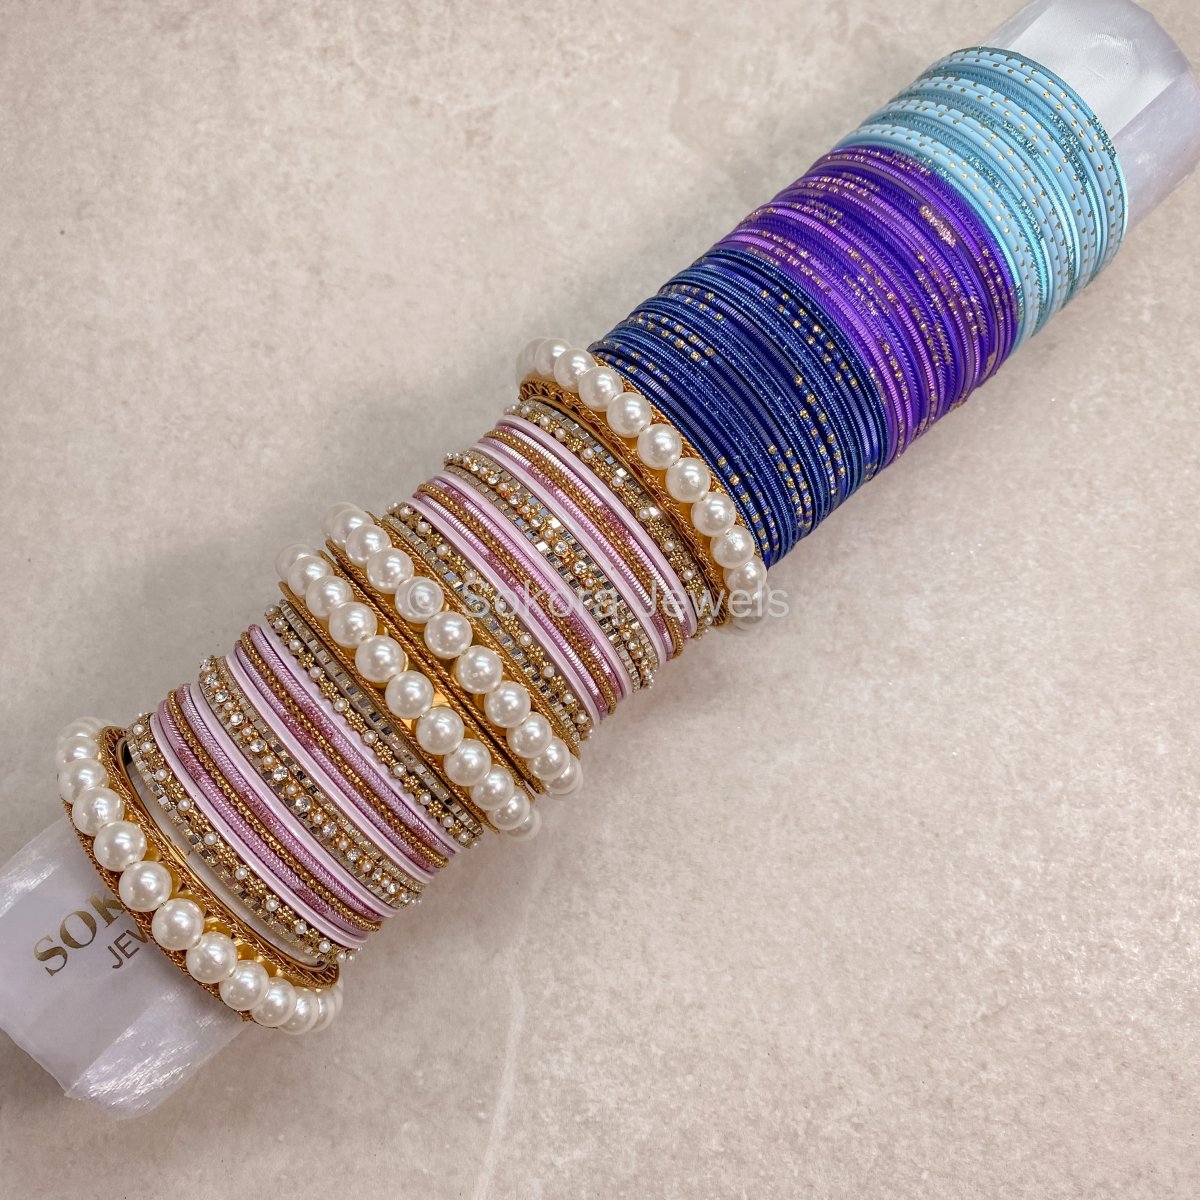 (Slightly less than perfect) Clearance Bangle Stack with Extra Colours - 2.4 - SOKORA JEWELS(Slightly less than perfect) Clearance Bangle Stack with Extra Colours - 2.4BANGLES